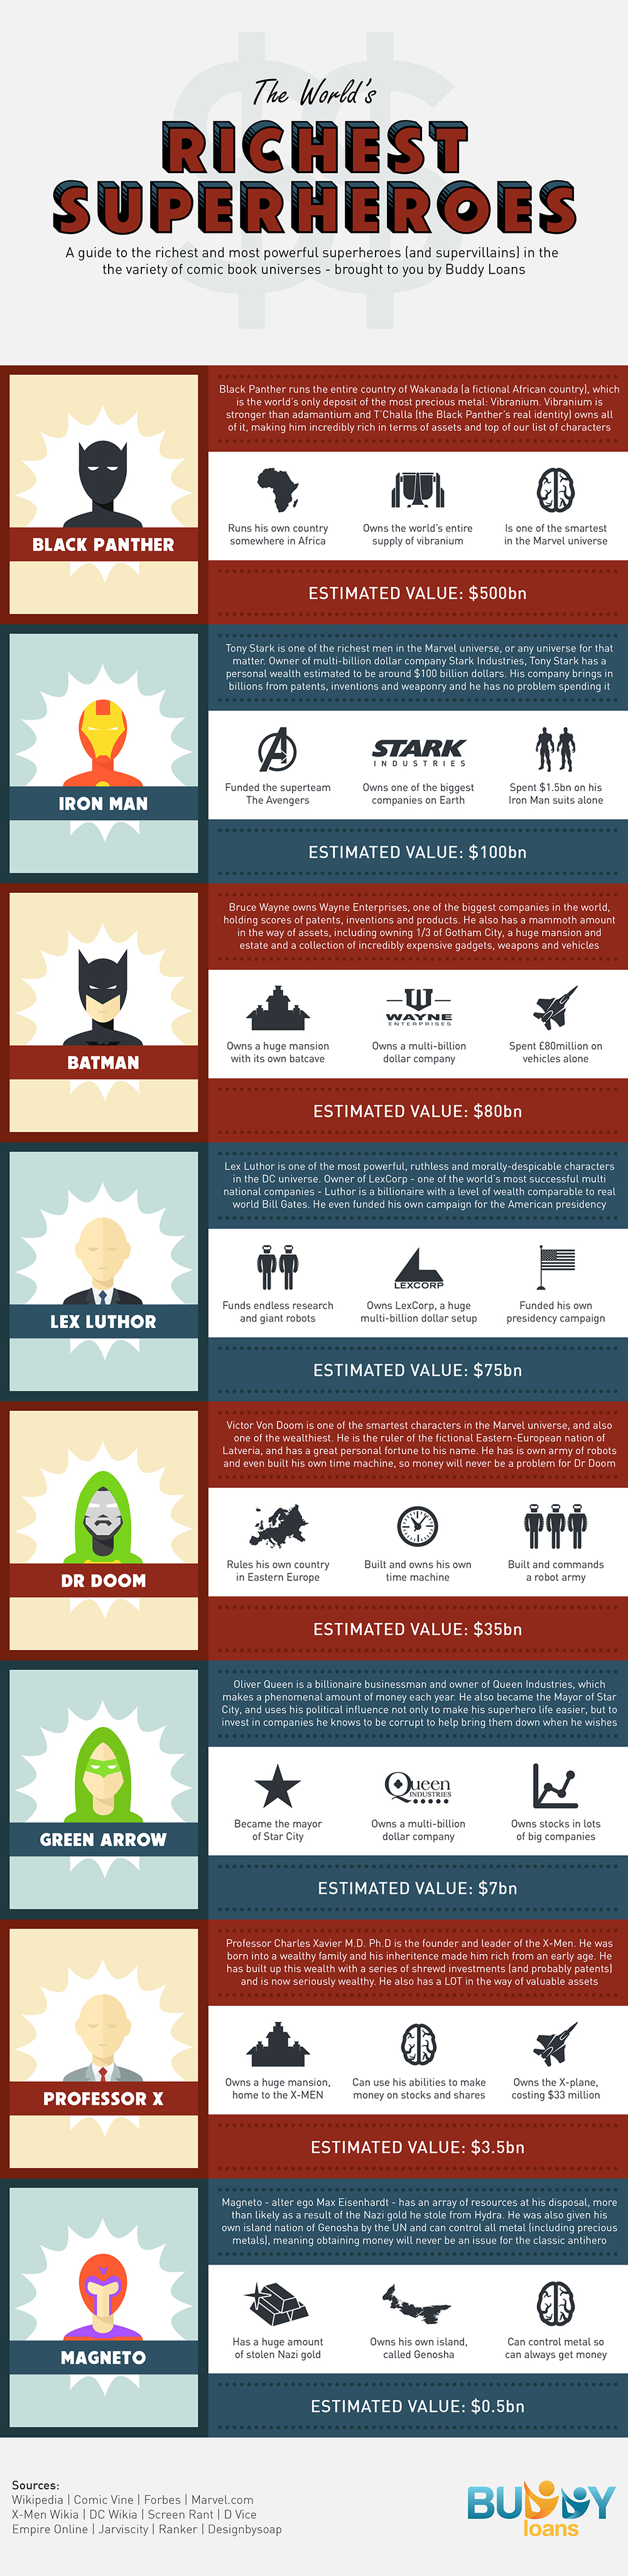 The World’s Richest Superheroes by Buddy Loans